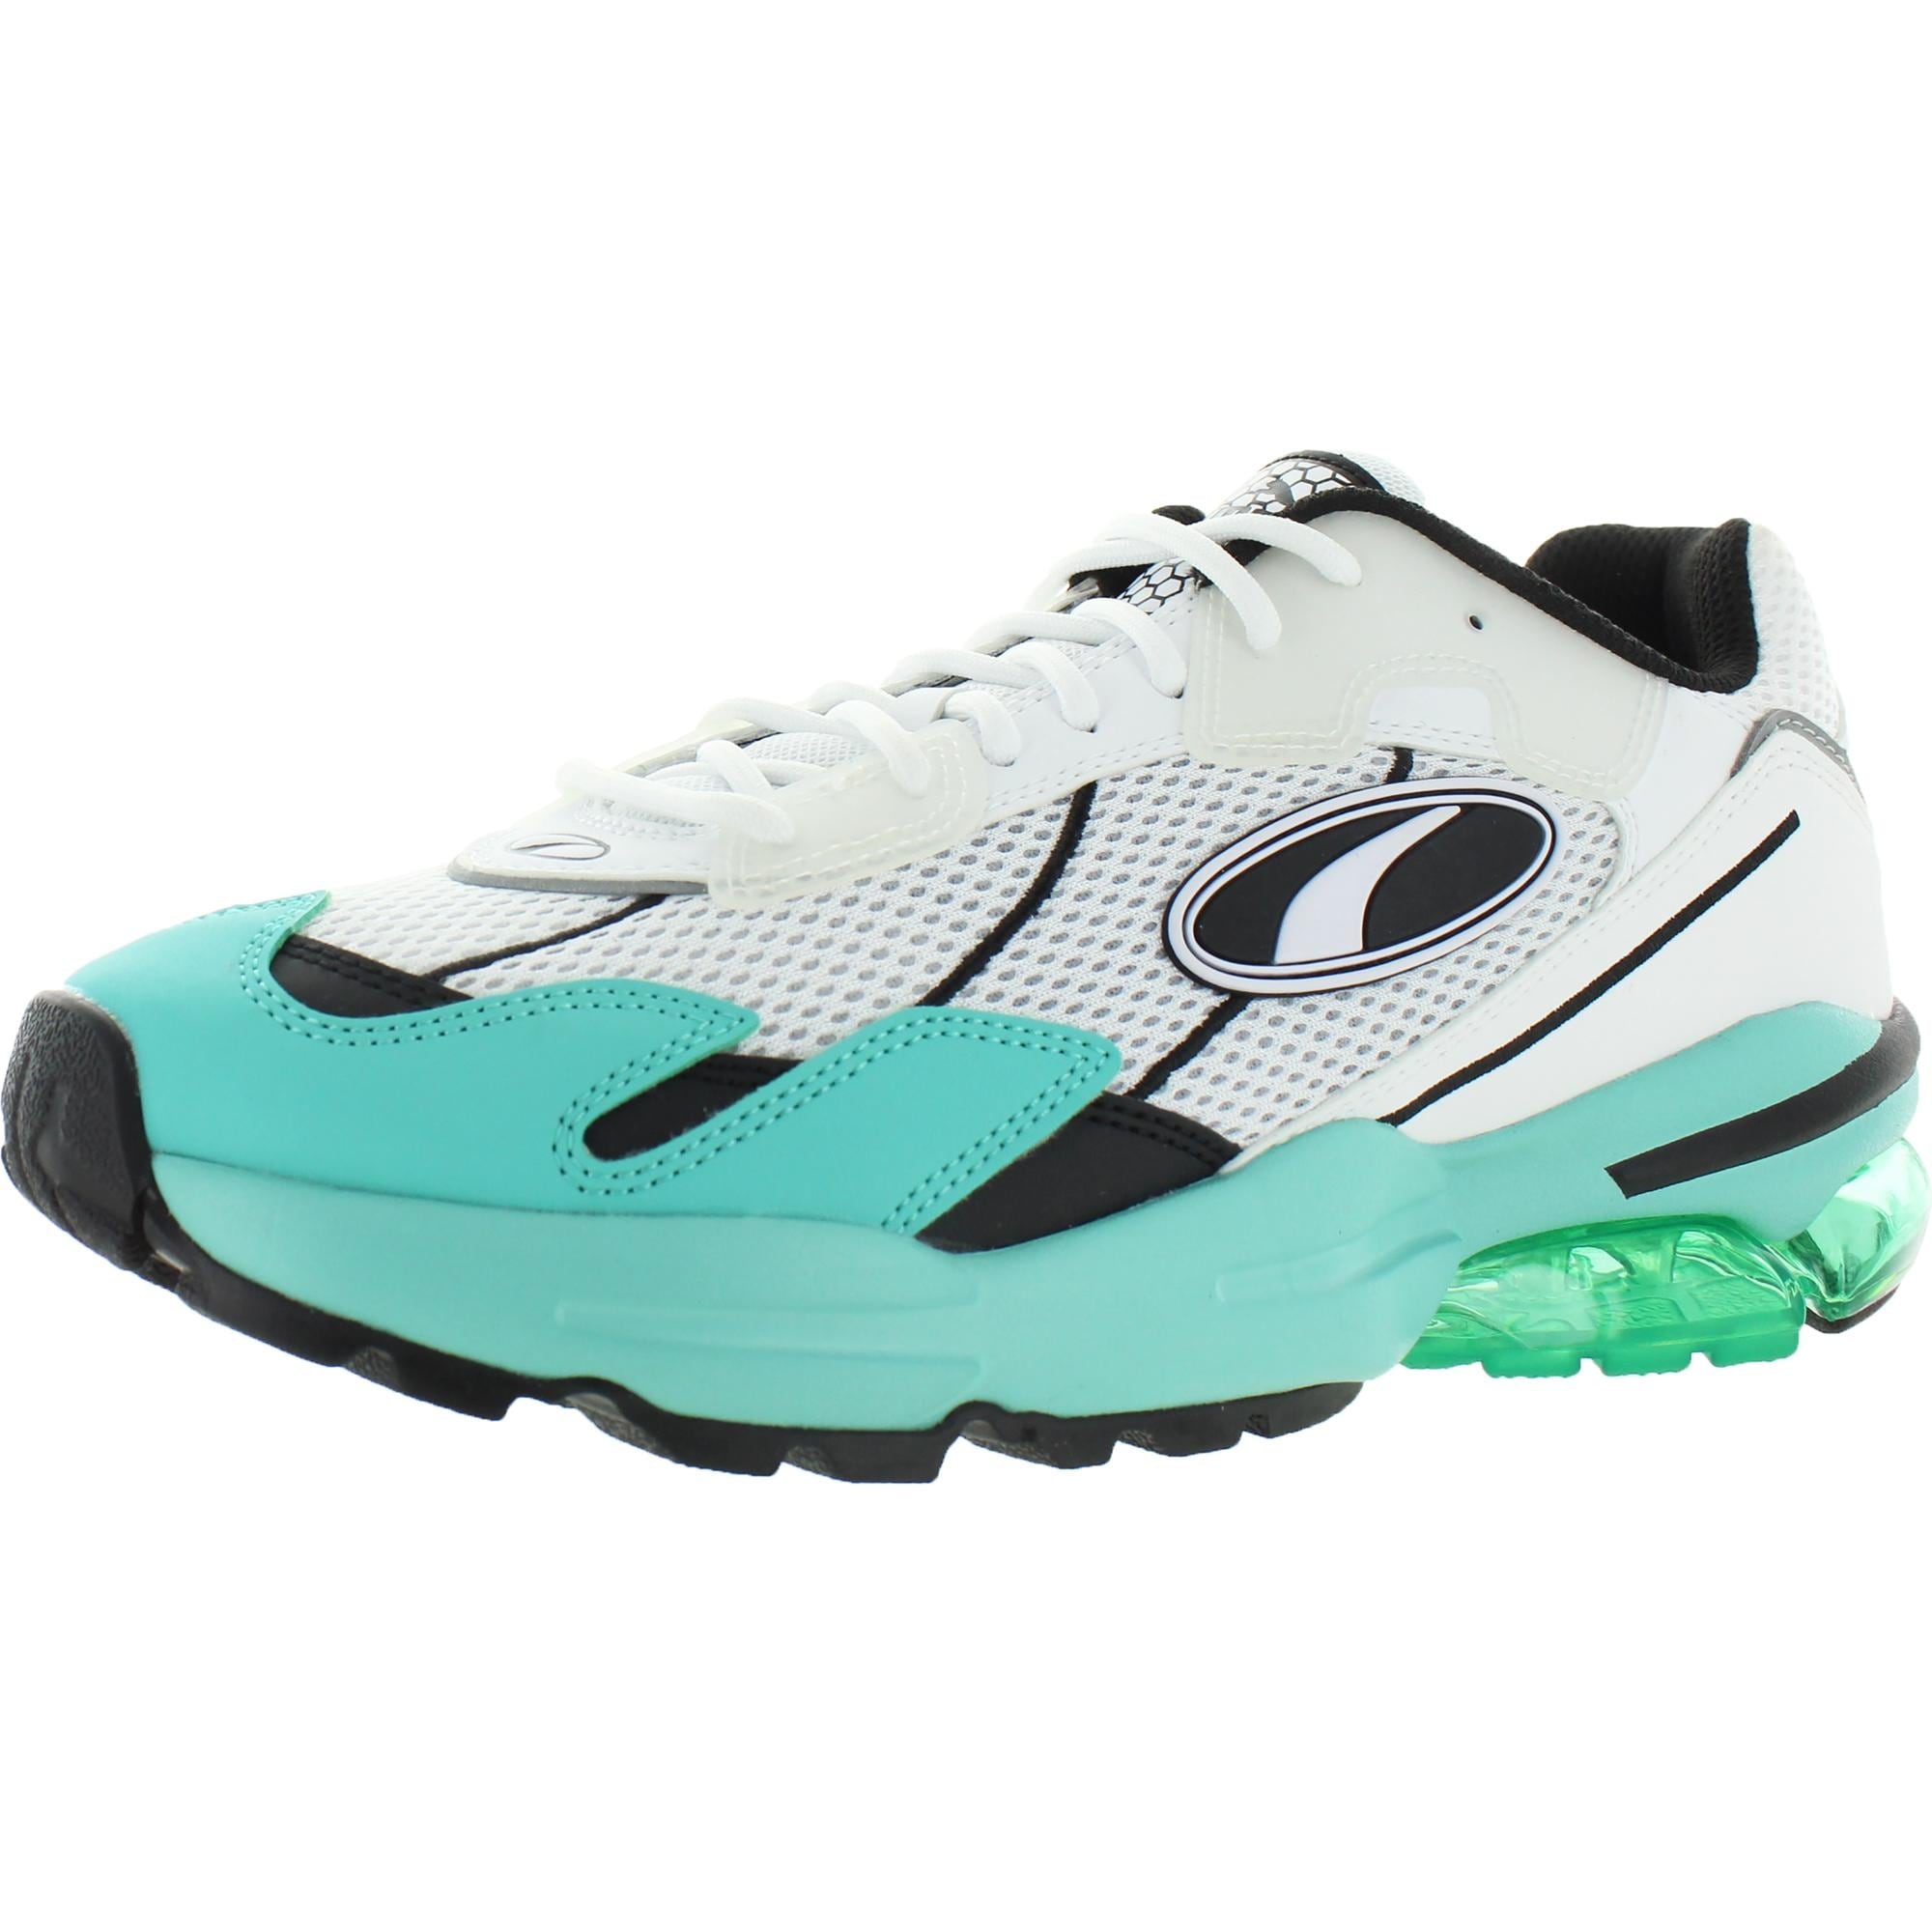 Puma Mens Cell Ultra Medical Sneakers 